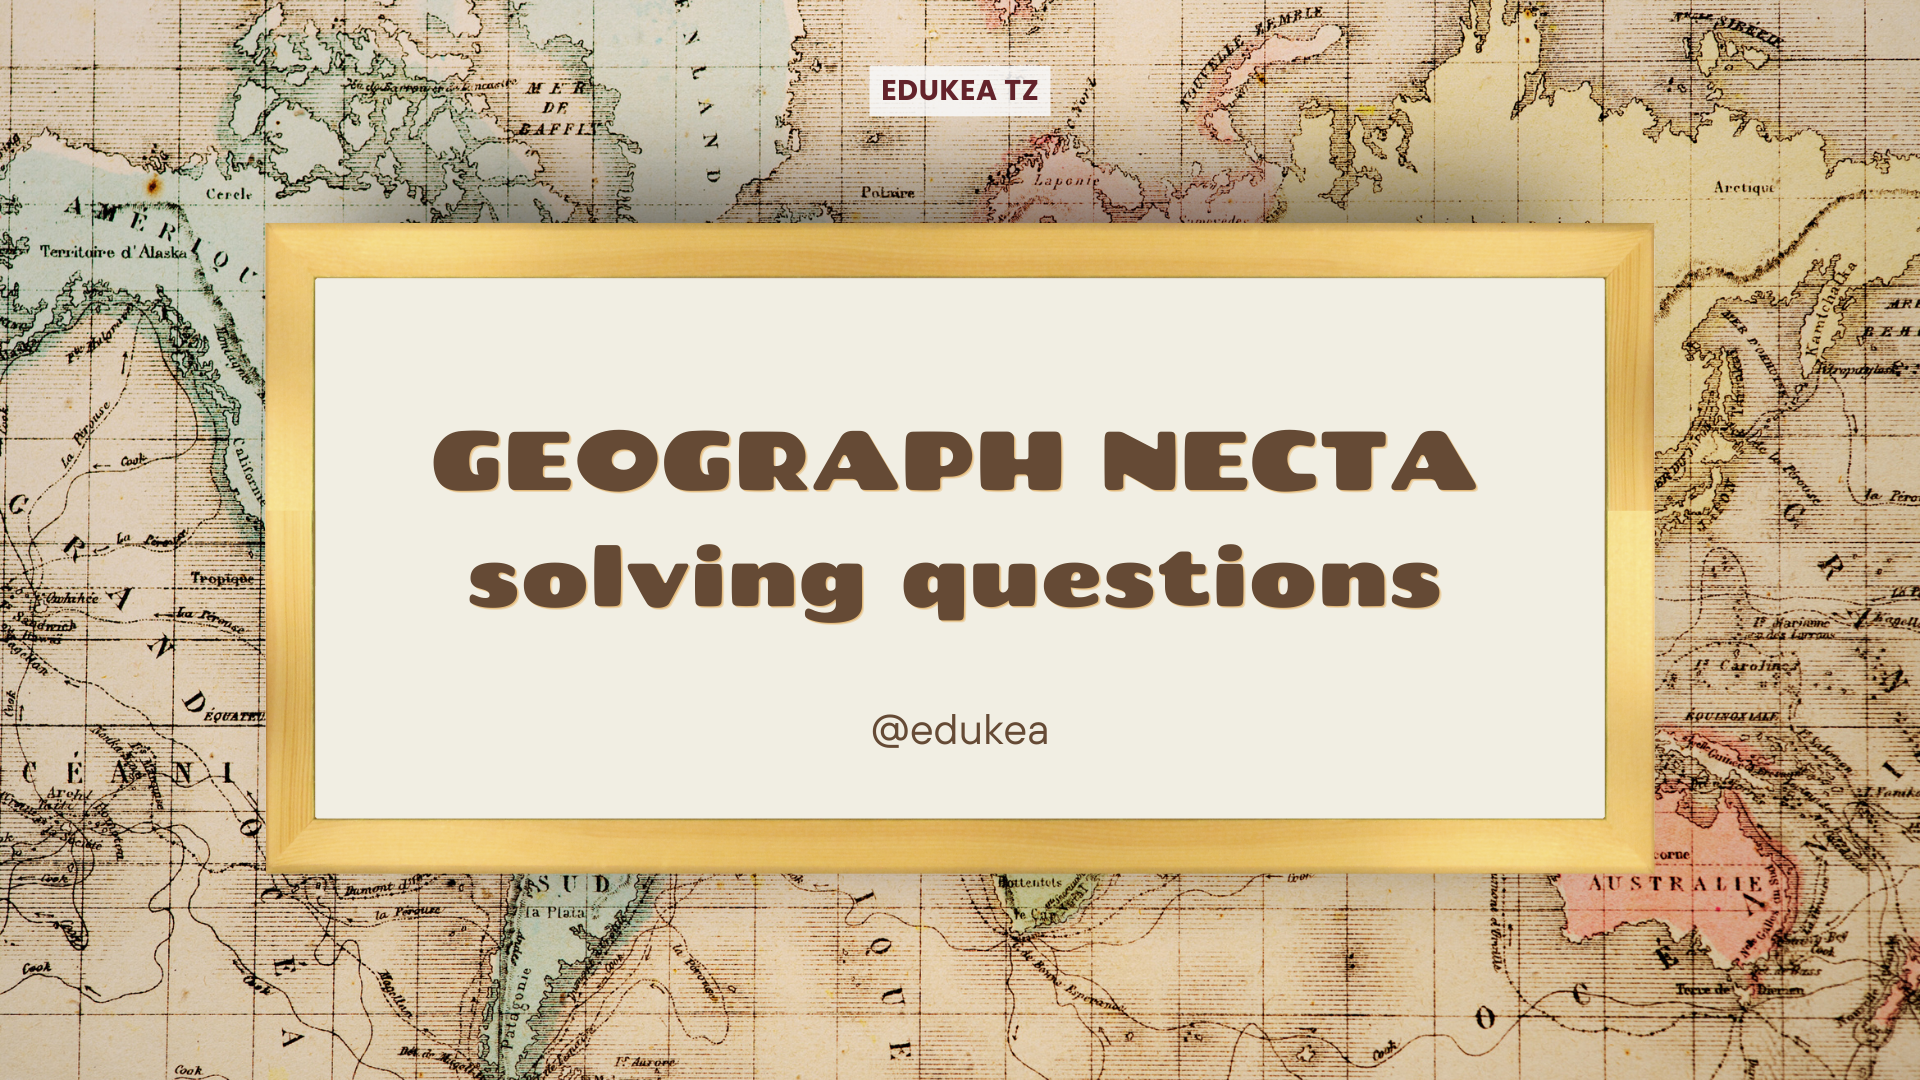 GEOGRAPH, FORM IV NECTA SOLVING QUESTIONS.